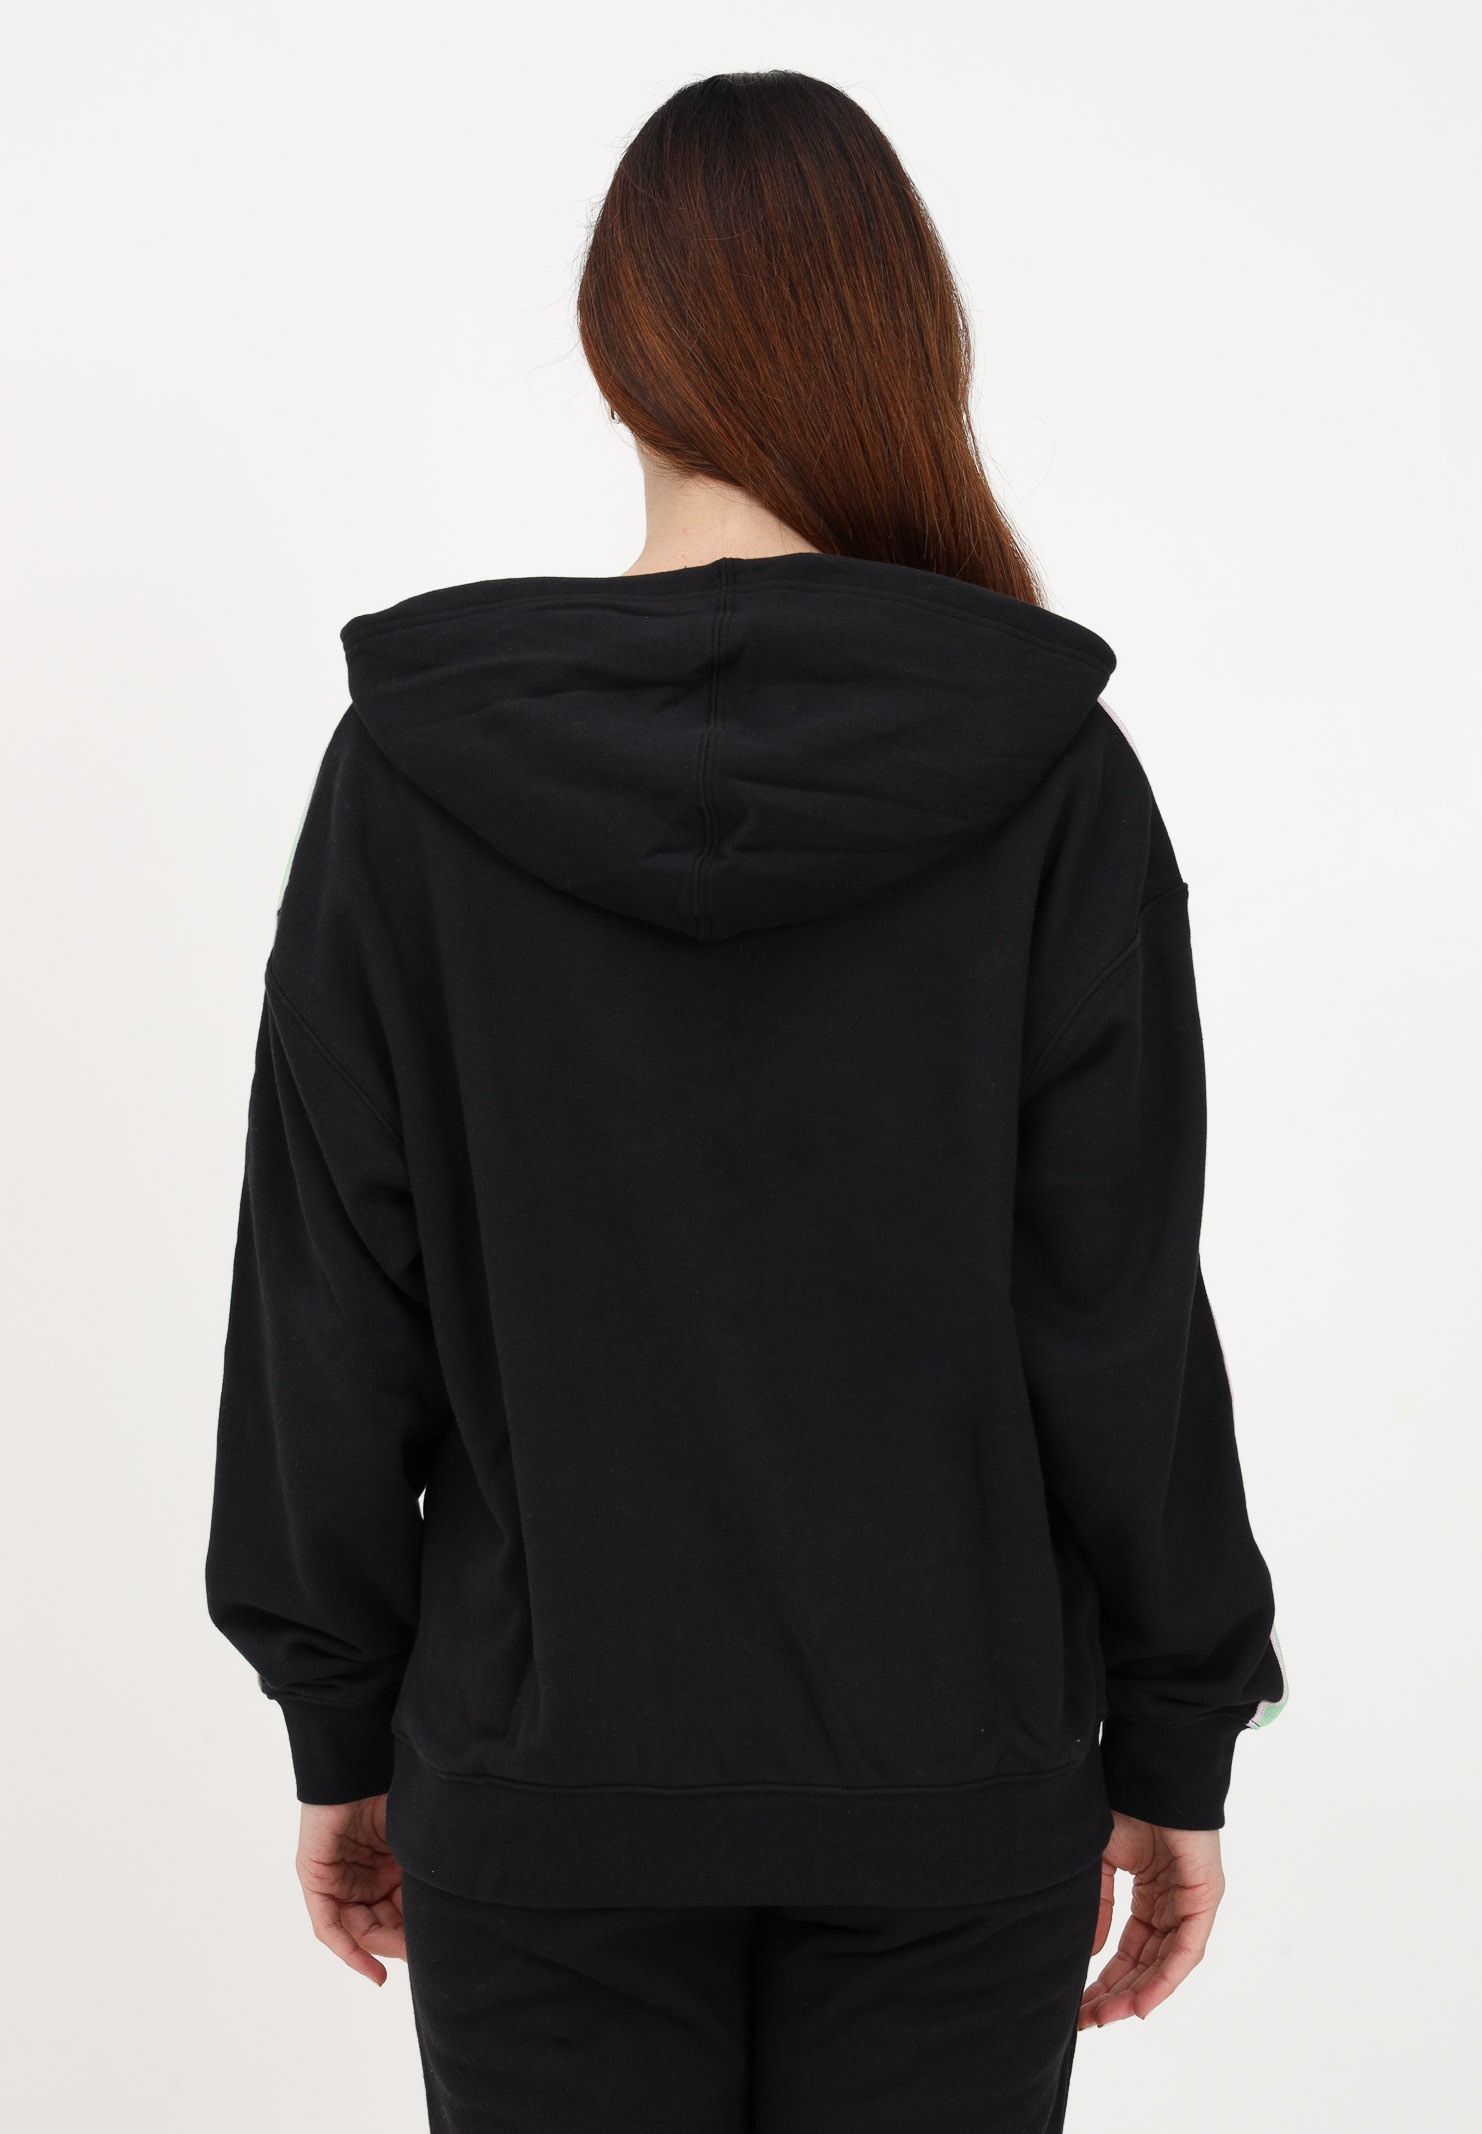 Black women's sweatshirt with hood and logo bands on the sleeves ADIDAS | HM1533.